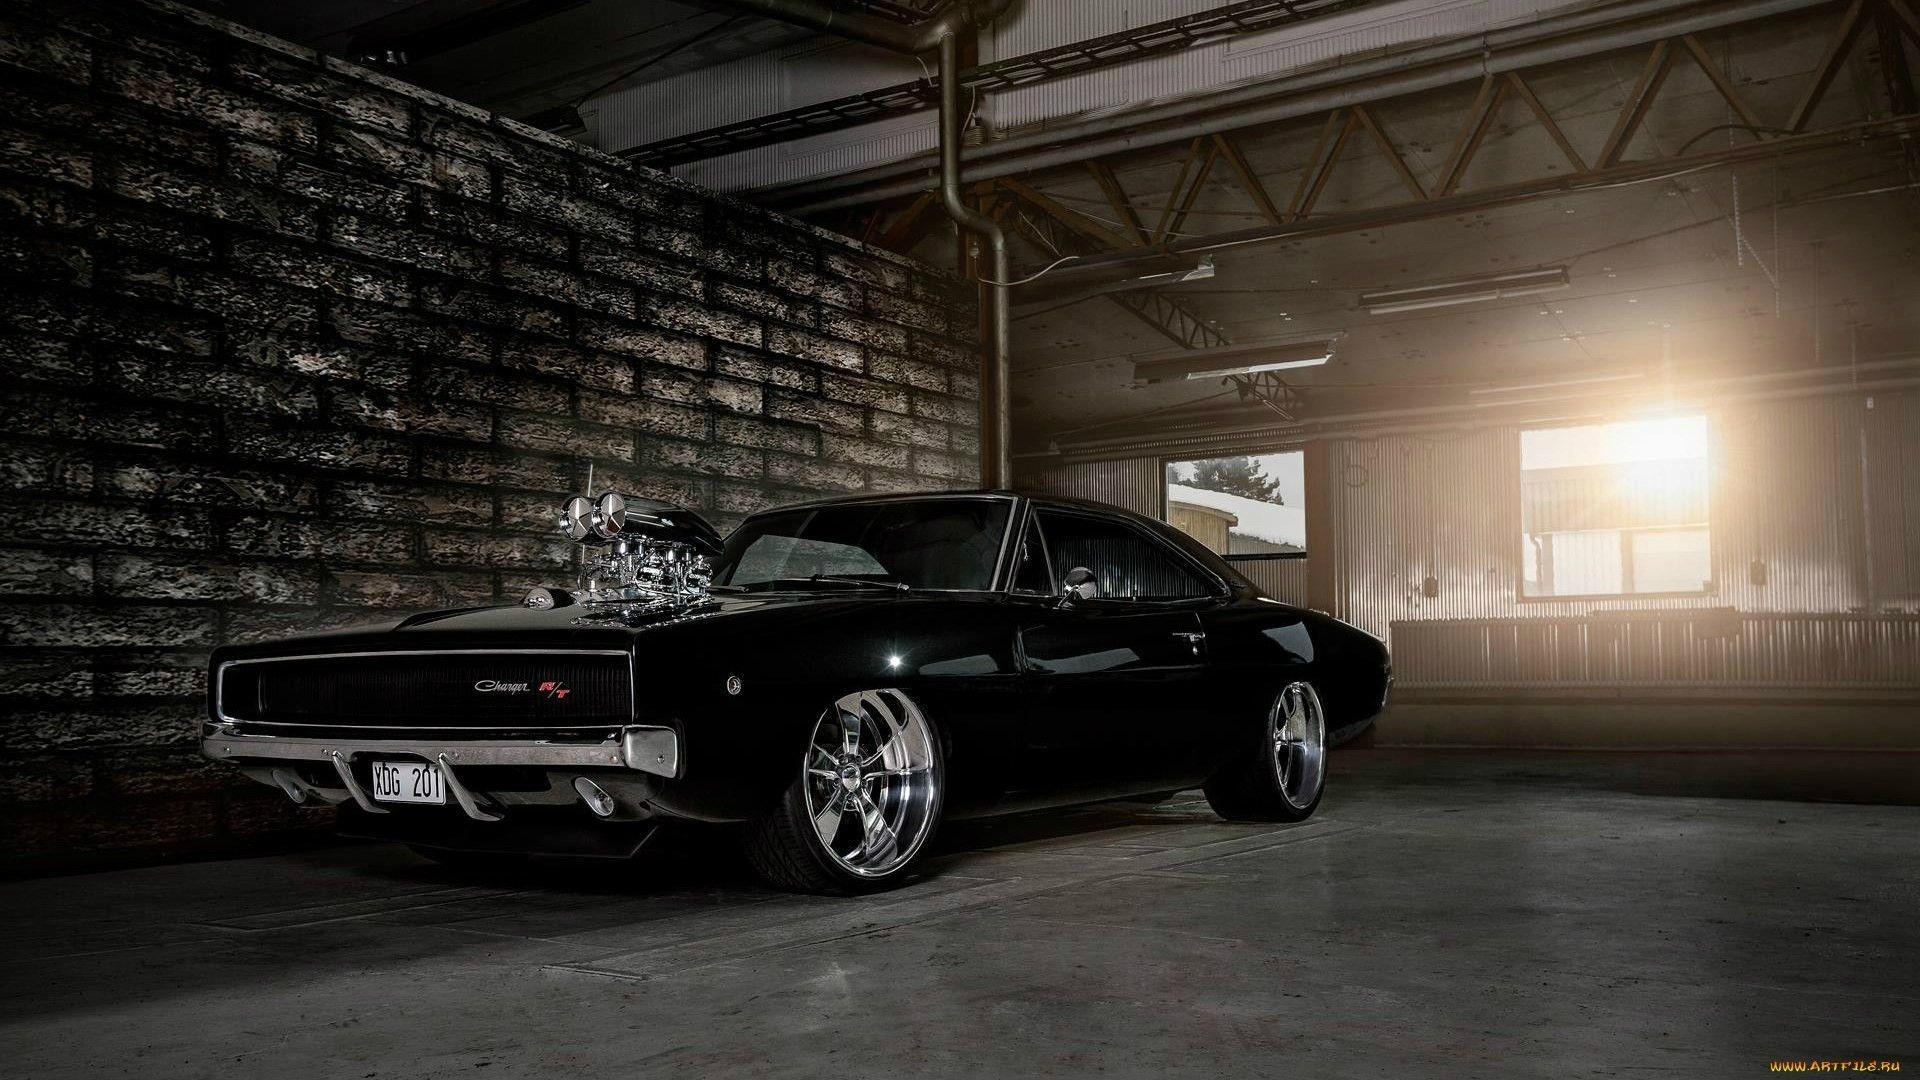 Dodge Charger Wallpaper The Best Image In